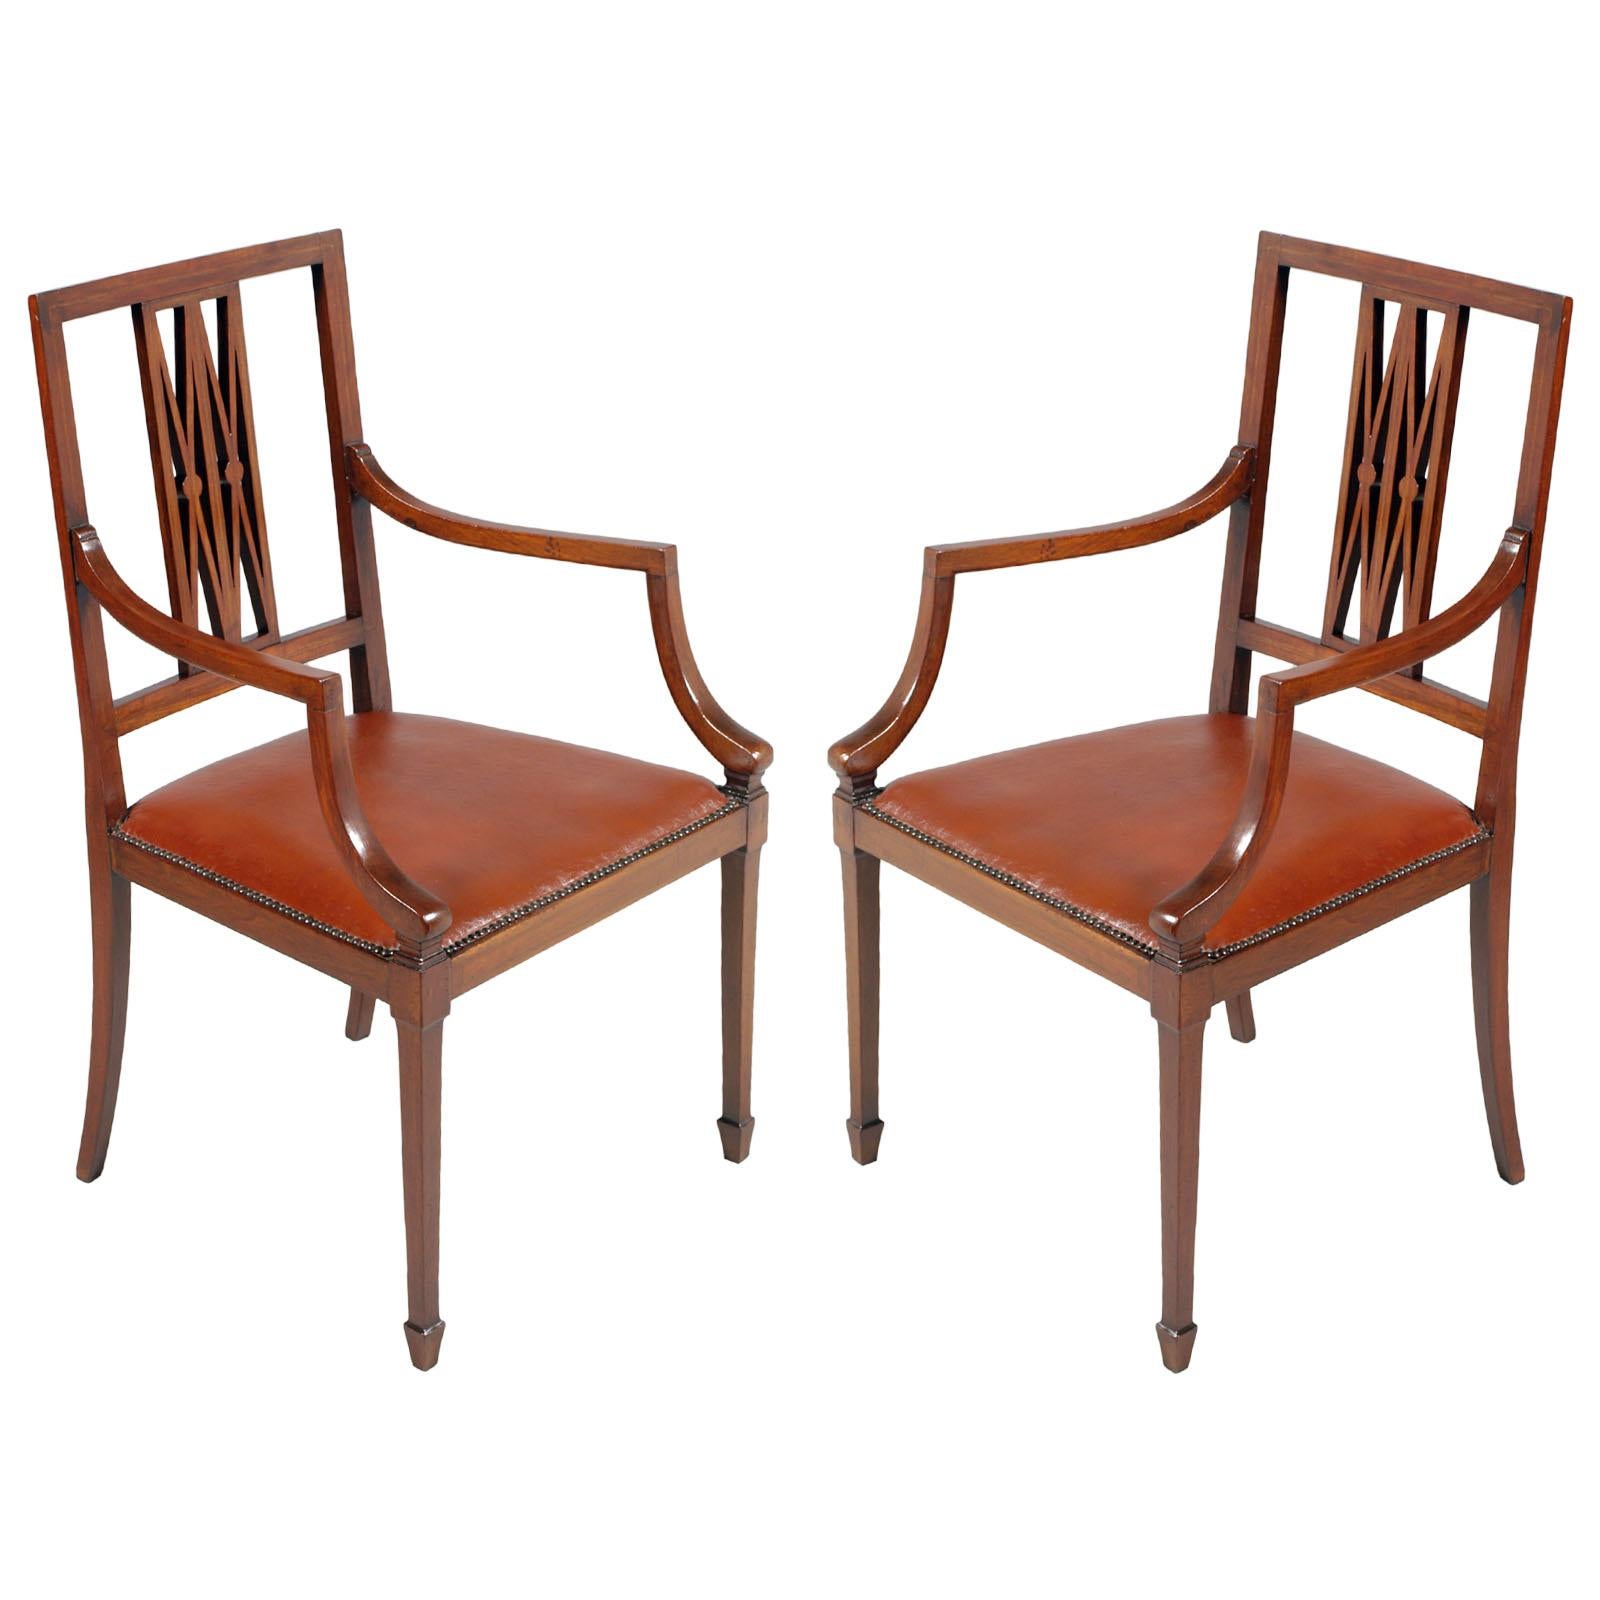 They can be sold separately
1900s leaving room settee, pair armchairs and sofa, Art Nouveau, by Jakob e Joseph Kohn, Wien, is in solid walnut , in the style of Josef Hoffmann 
The upholstery, in leatherette, is in good condition and has been redone,